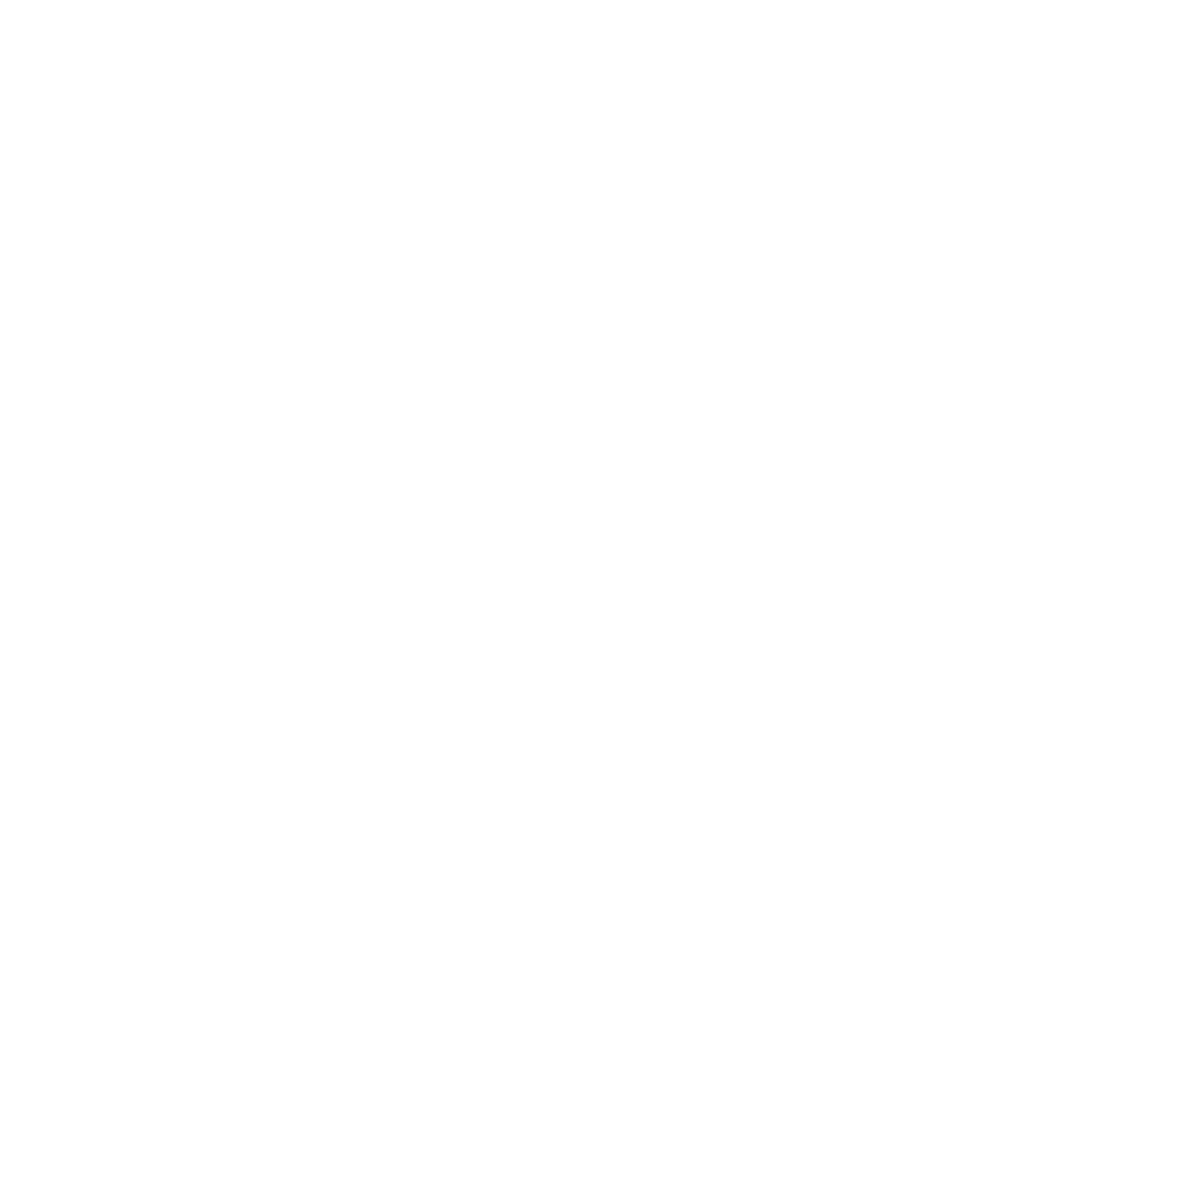 An icon showing the scales of justice